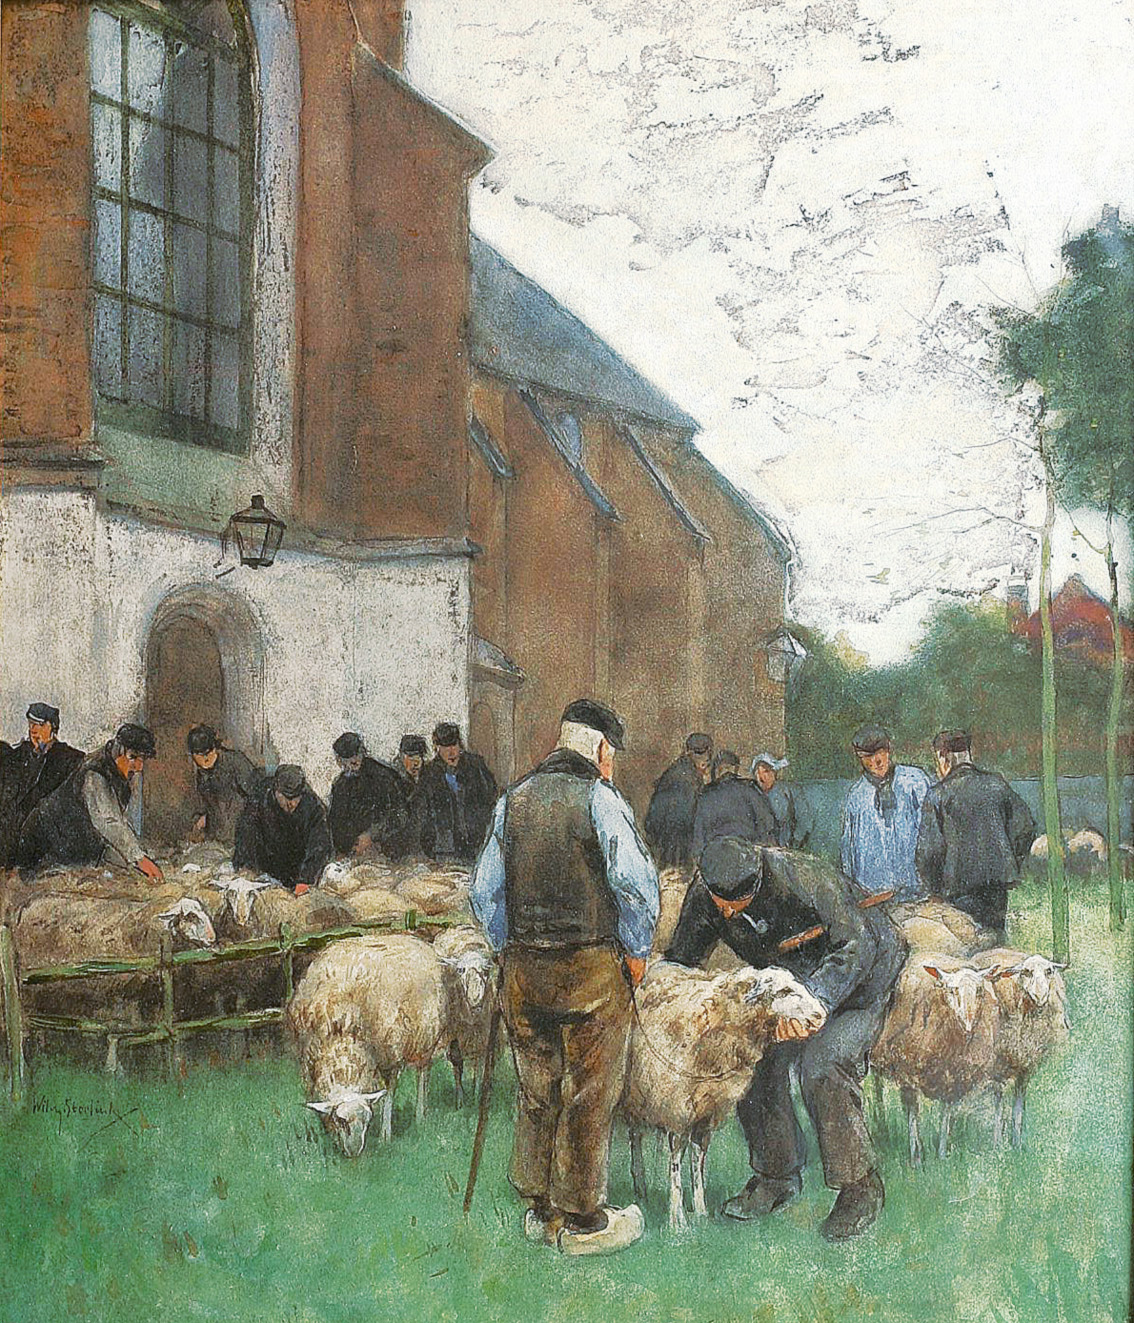 Sheep on the market